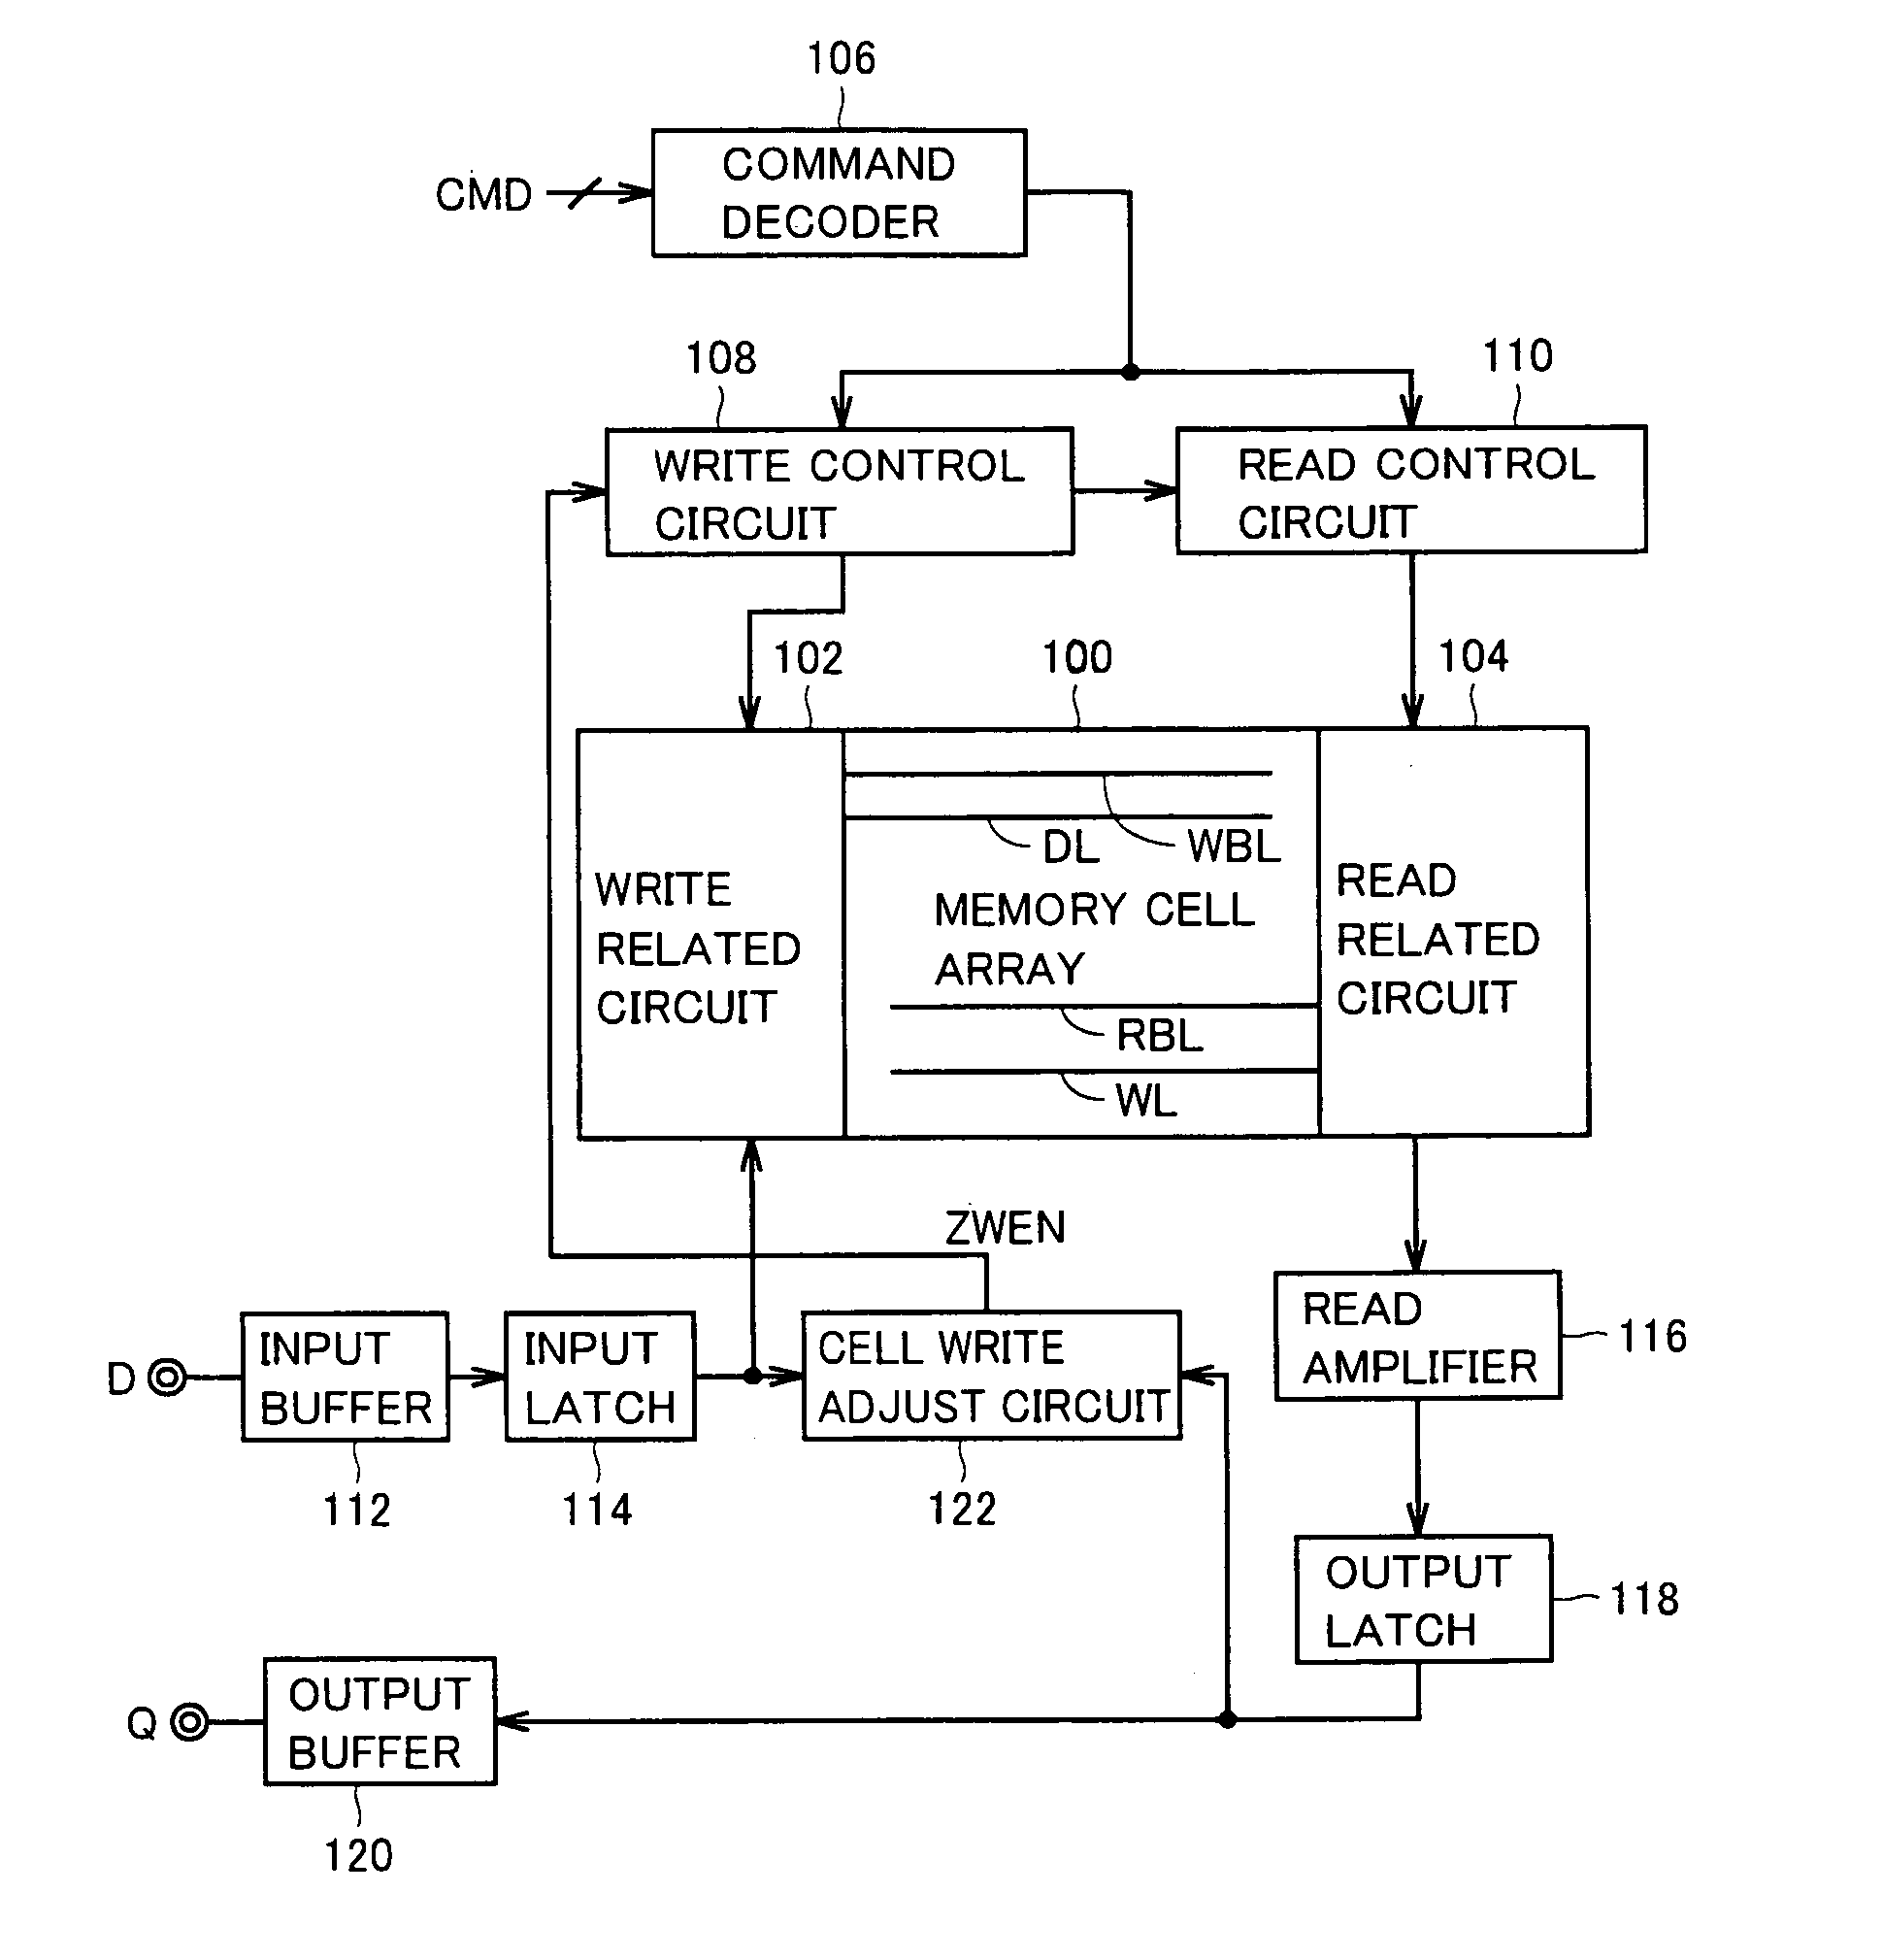 Non-volatile semiconductor memory device allowing concurrent data writing and data reading